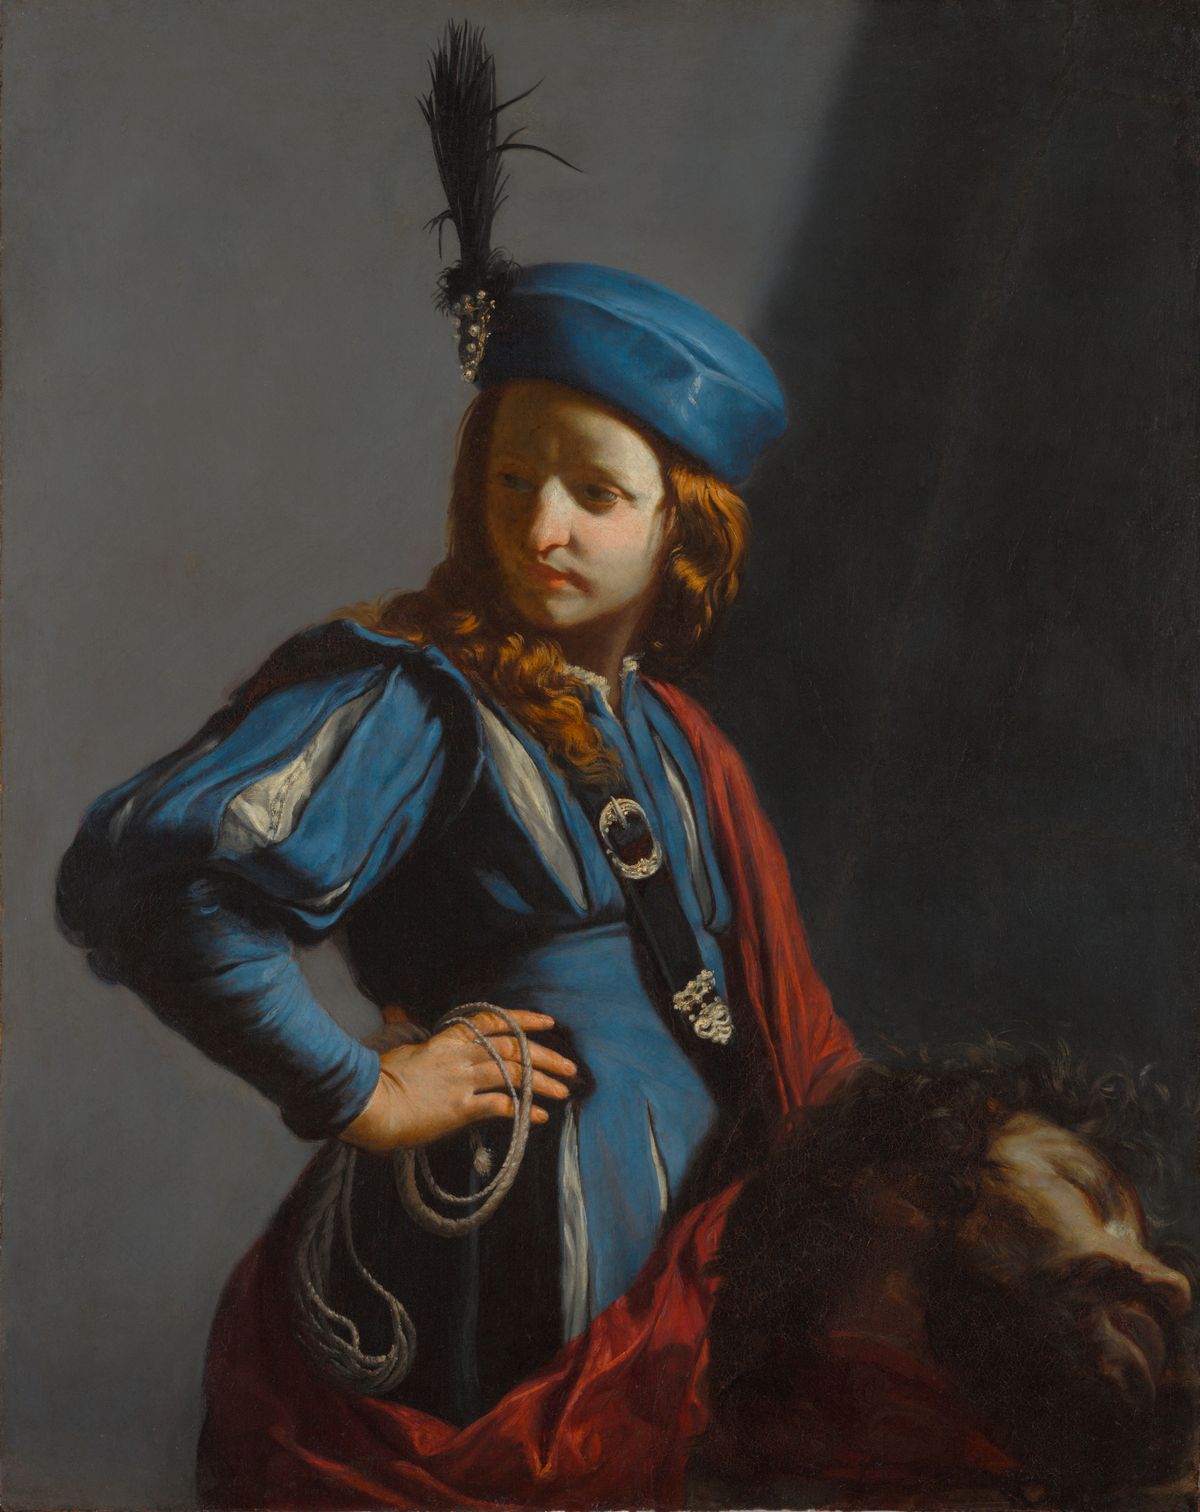 David with the Head of Goliath by Guido Cagnacci (1645-1650) - Public Domain Bible Painting